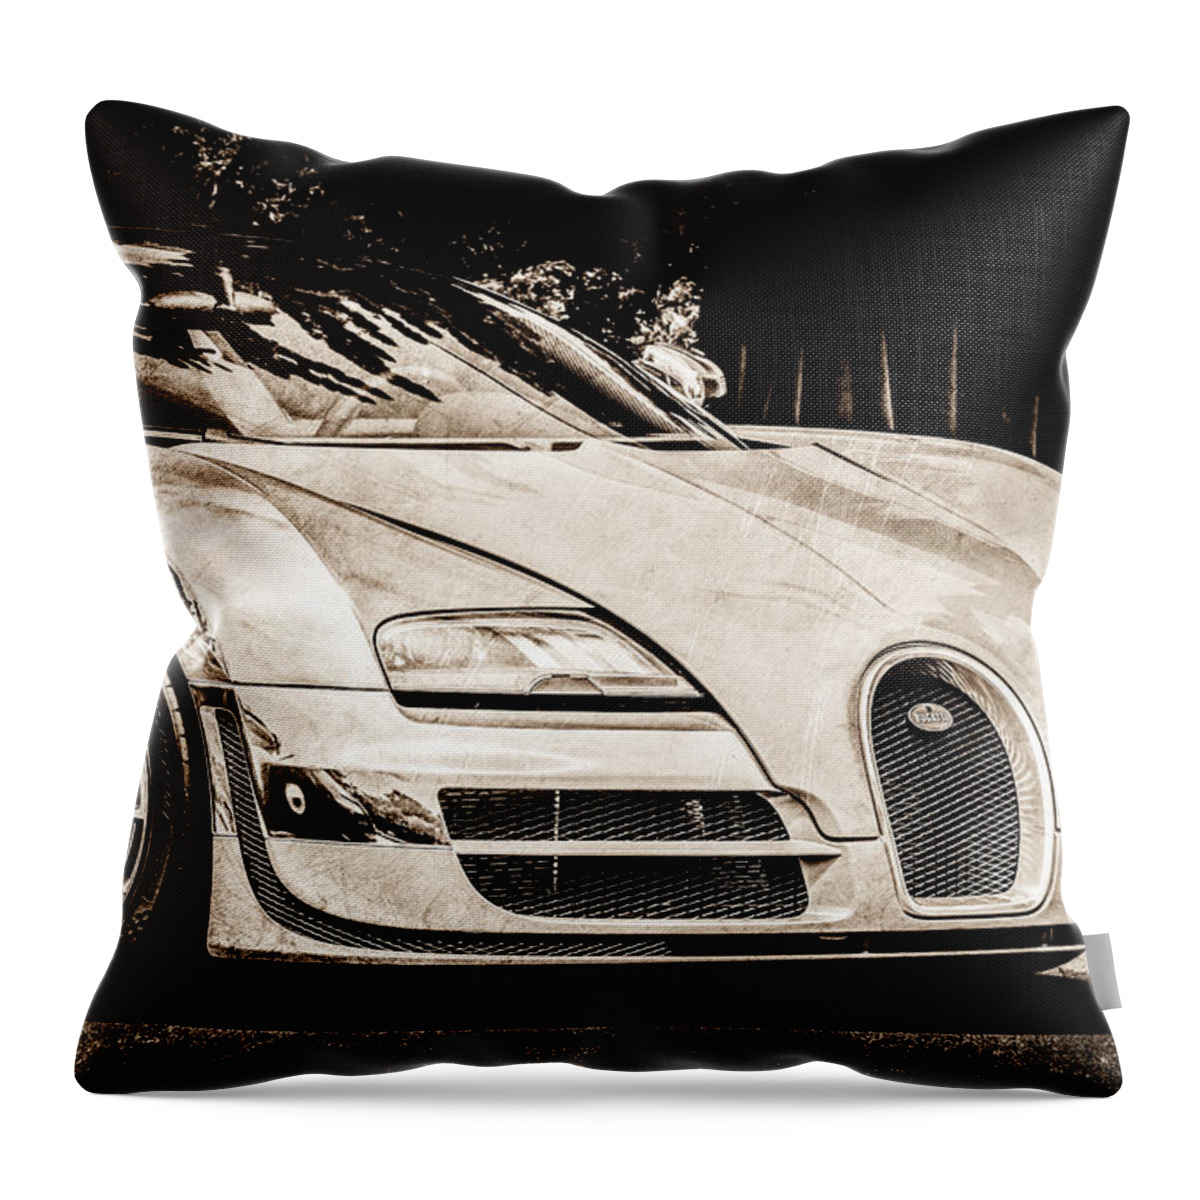 Bugatti Legend - Veyron Special Edition Throw Pillow featuring the photograph Bugatti Legend - Veyron Special Edition -0844s by Jill Reger